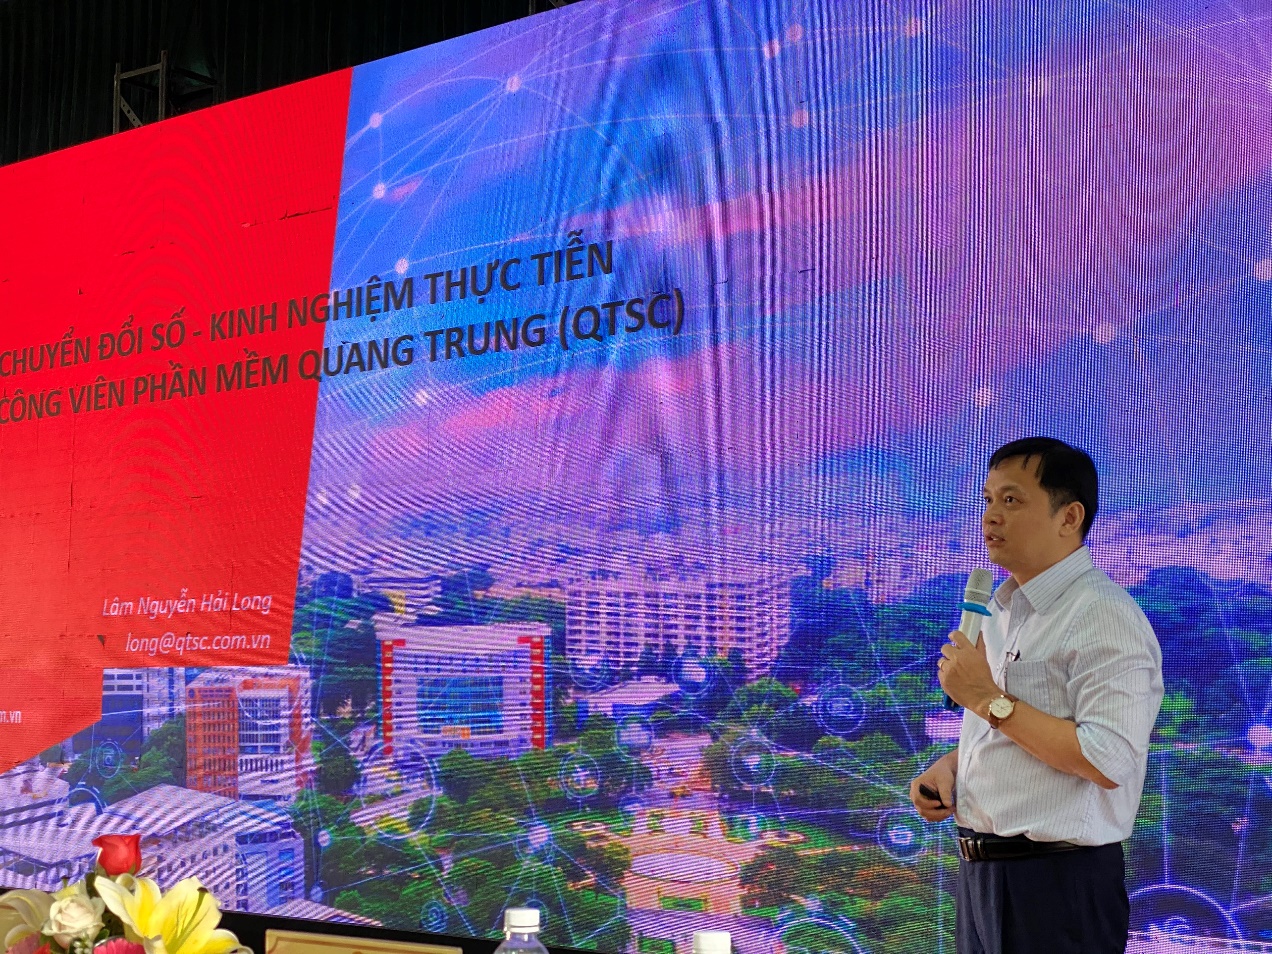 Image 1: Mr. Lam Nguyen Hai Long – CEO of QTSC shared the experience in digital transformation at Quang Trung Software City